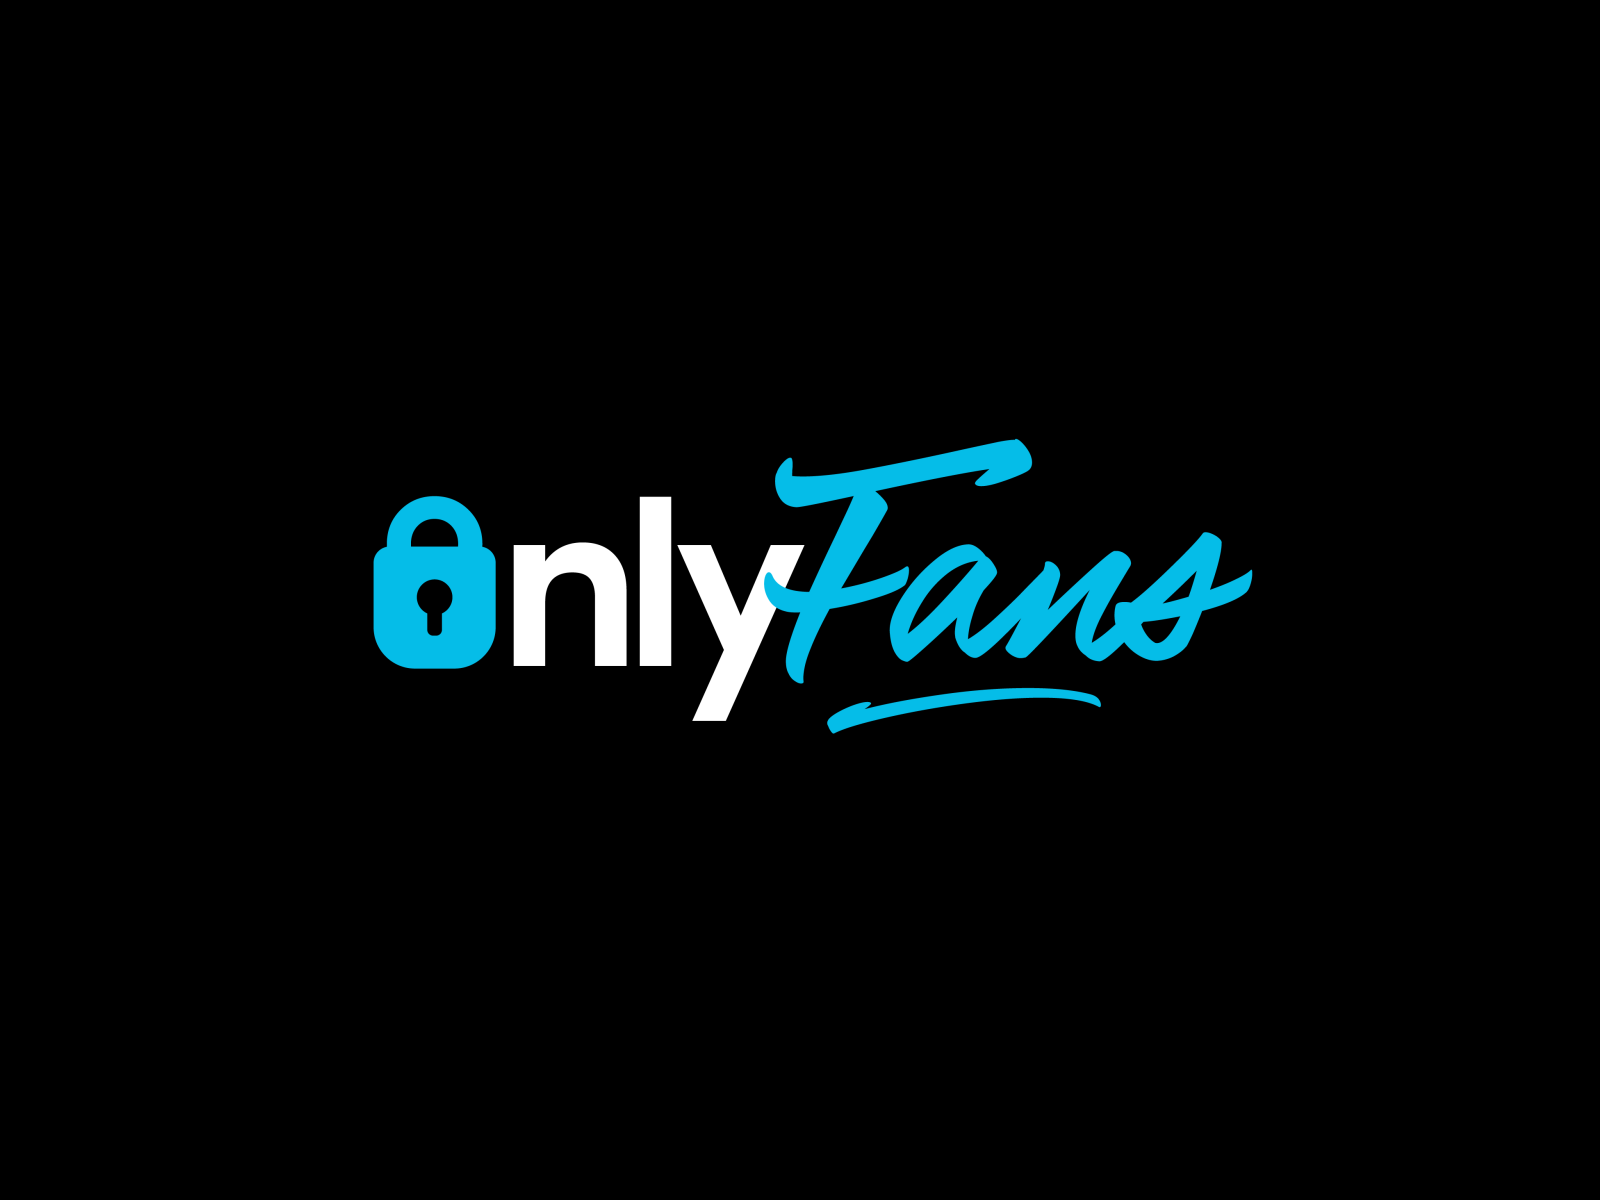 OnlyFans by Vedant Patel on Dribbble